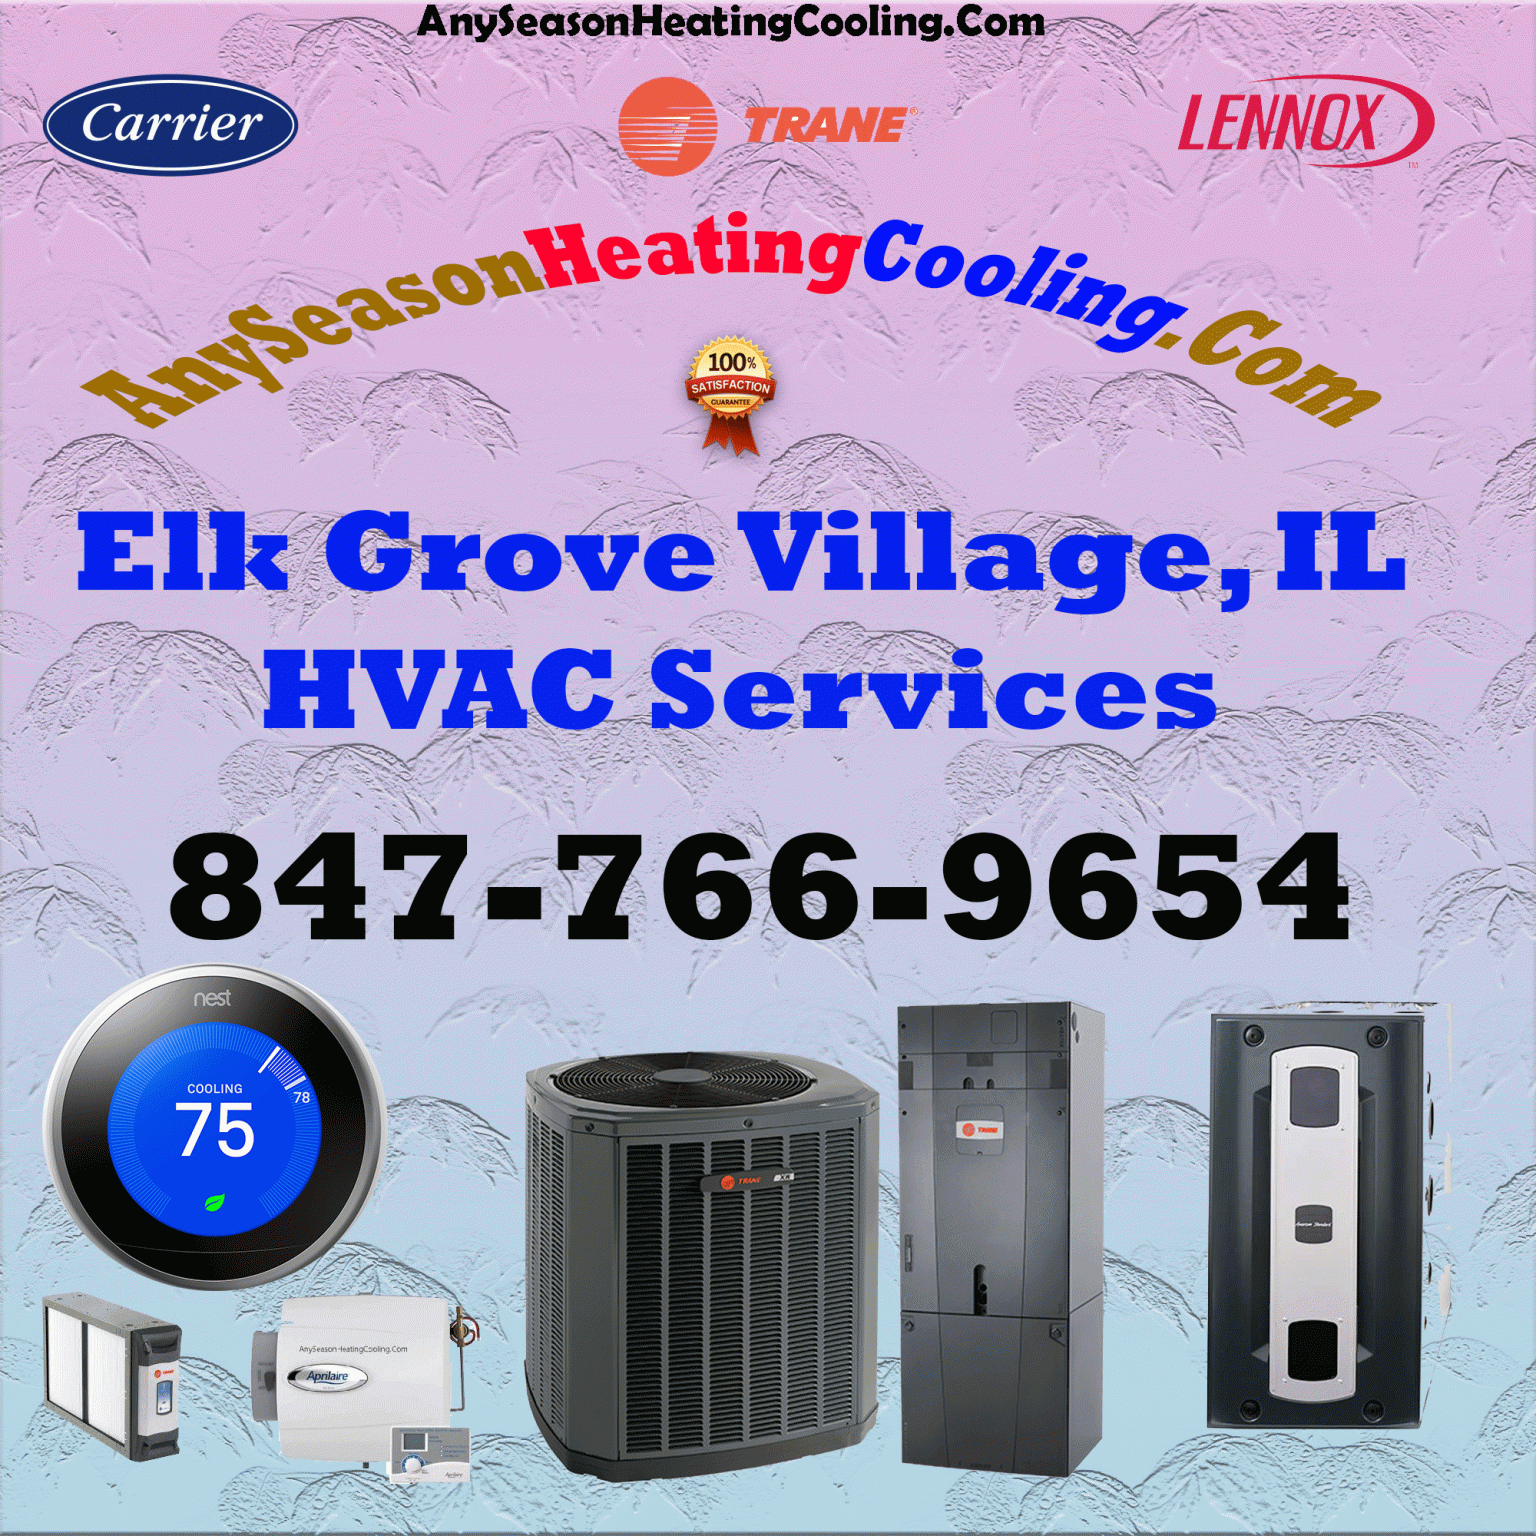 Elk Grove Village, IL Furnace Replacement for Less & Furnace